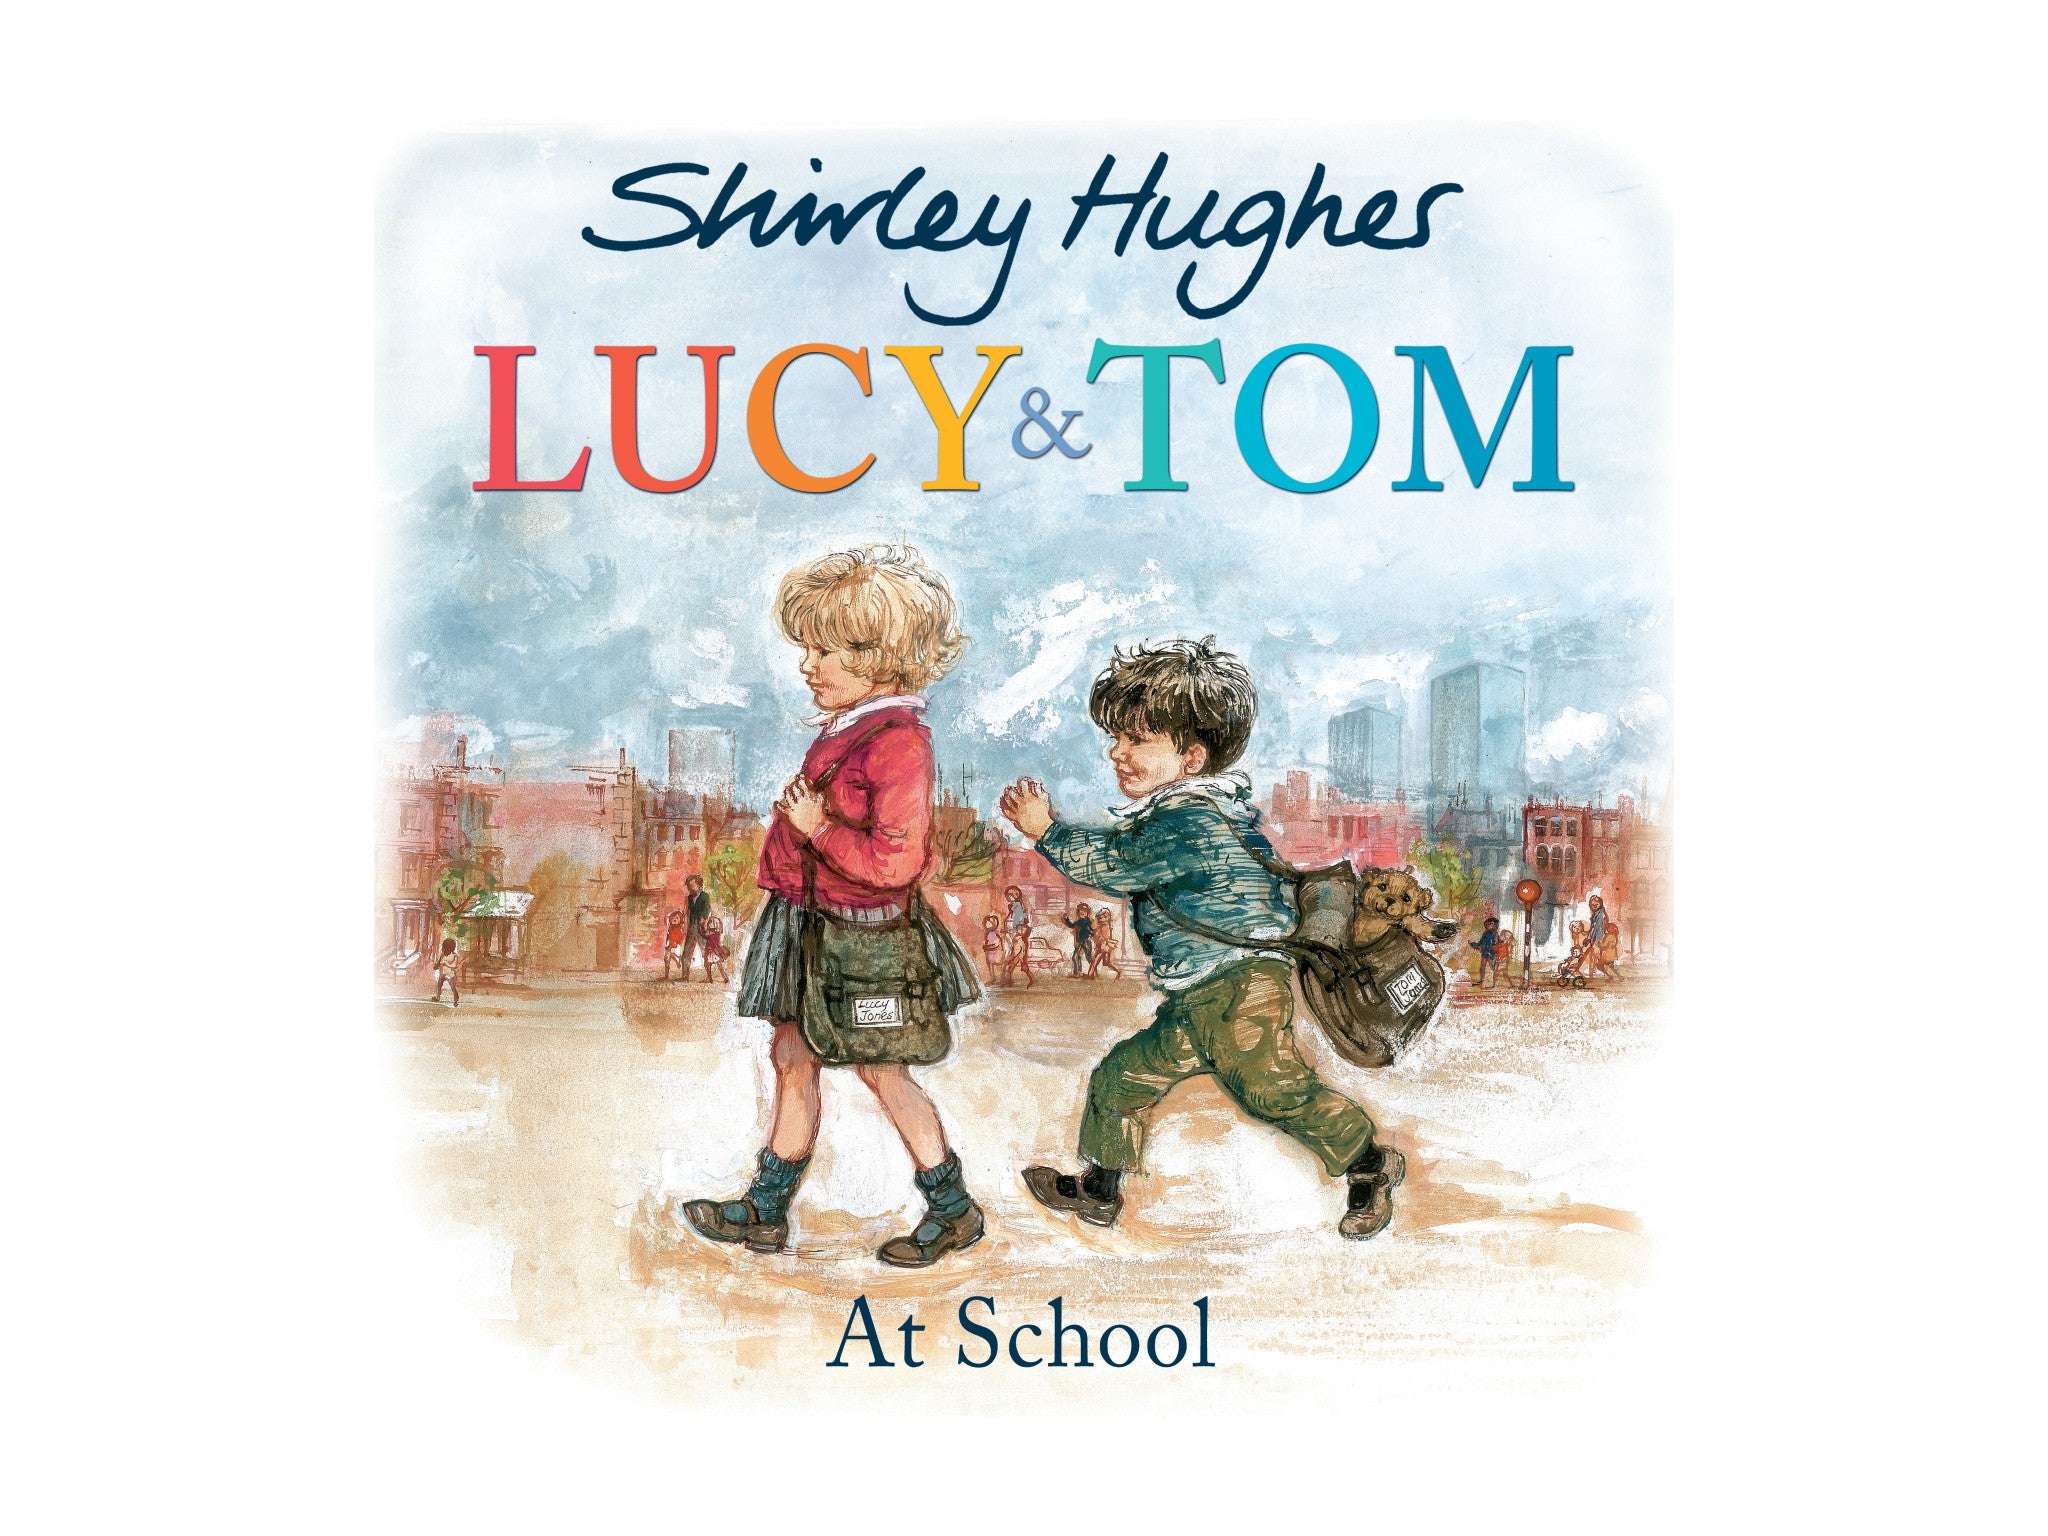 Lucy and Tom at School by Shirley Hughes, published by Red Fox indybest.jpeg